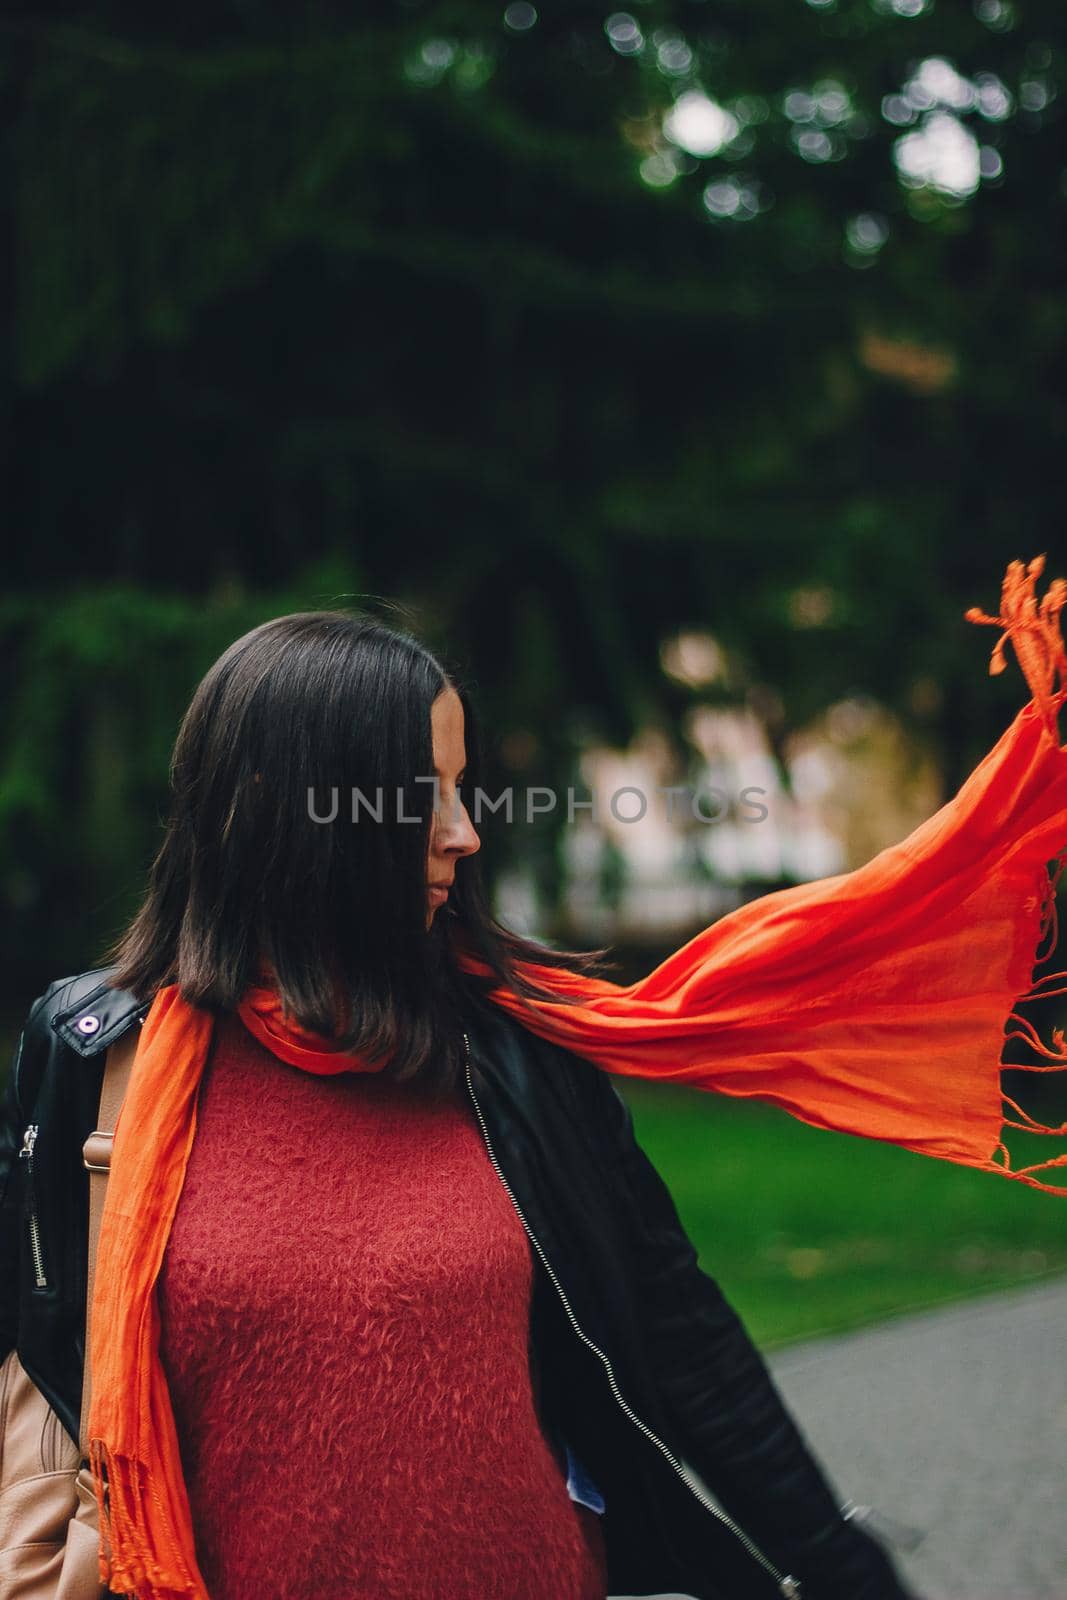 Portrait of a happy woman playing with bright orange scarf in the park. by mmp1206